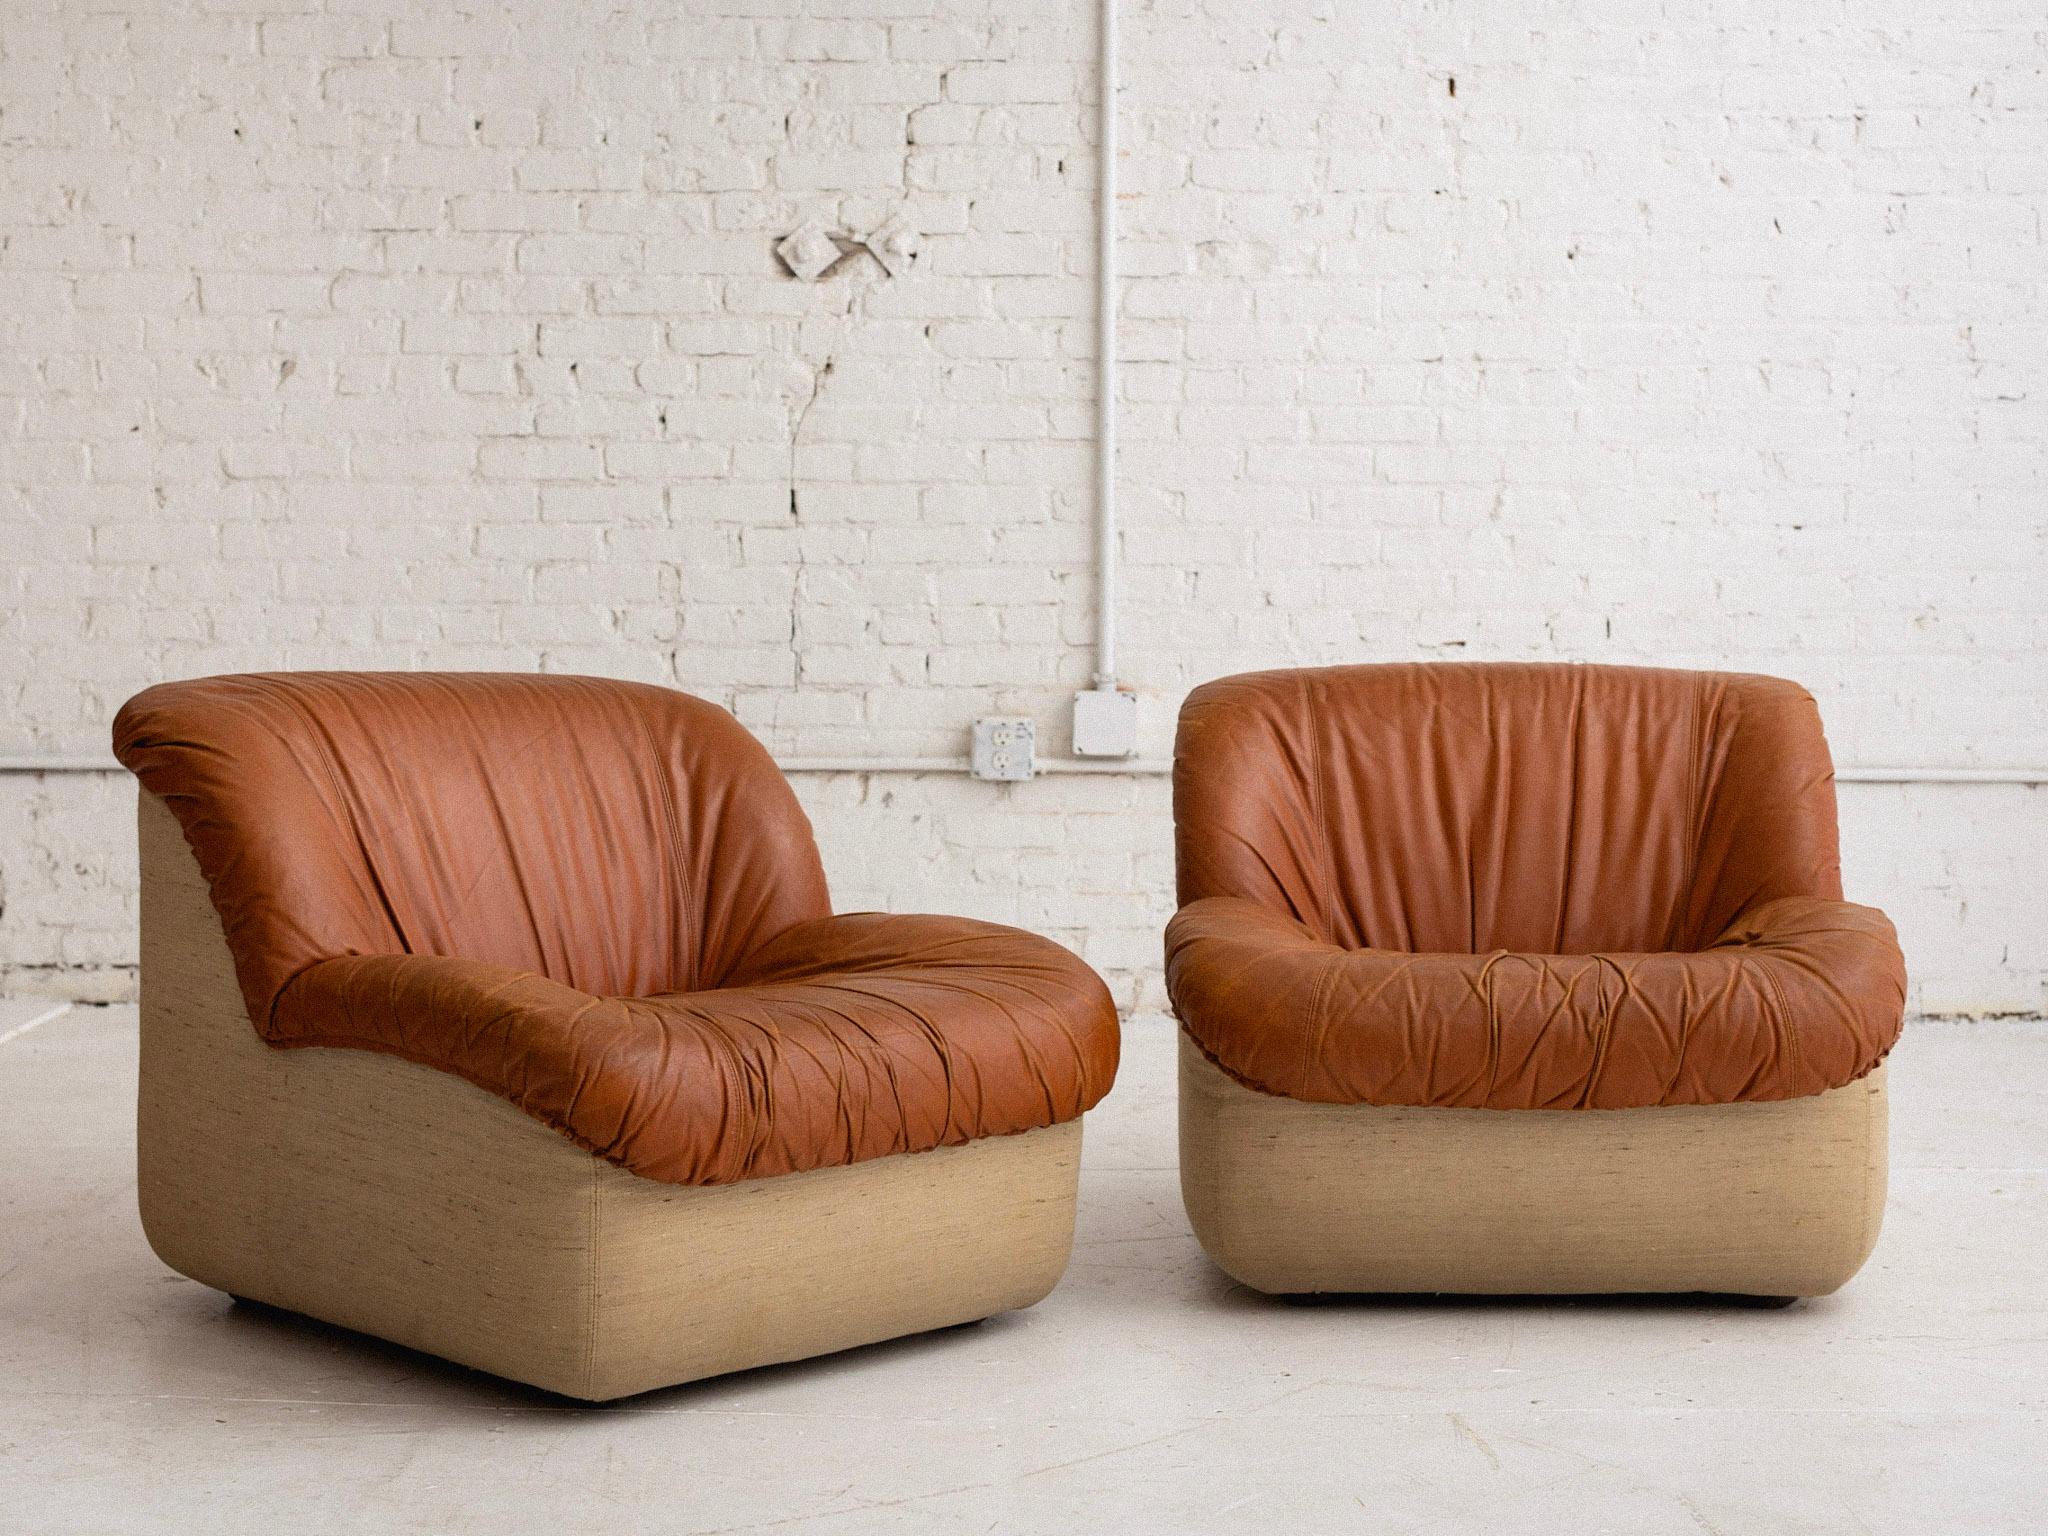 Henning Korch for Swan ‘Caprice’ Leather Chair / Modular Seating For Sale 8